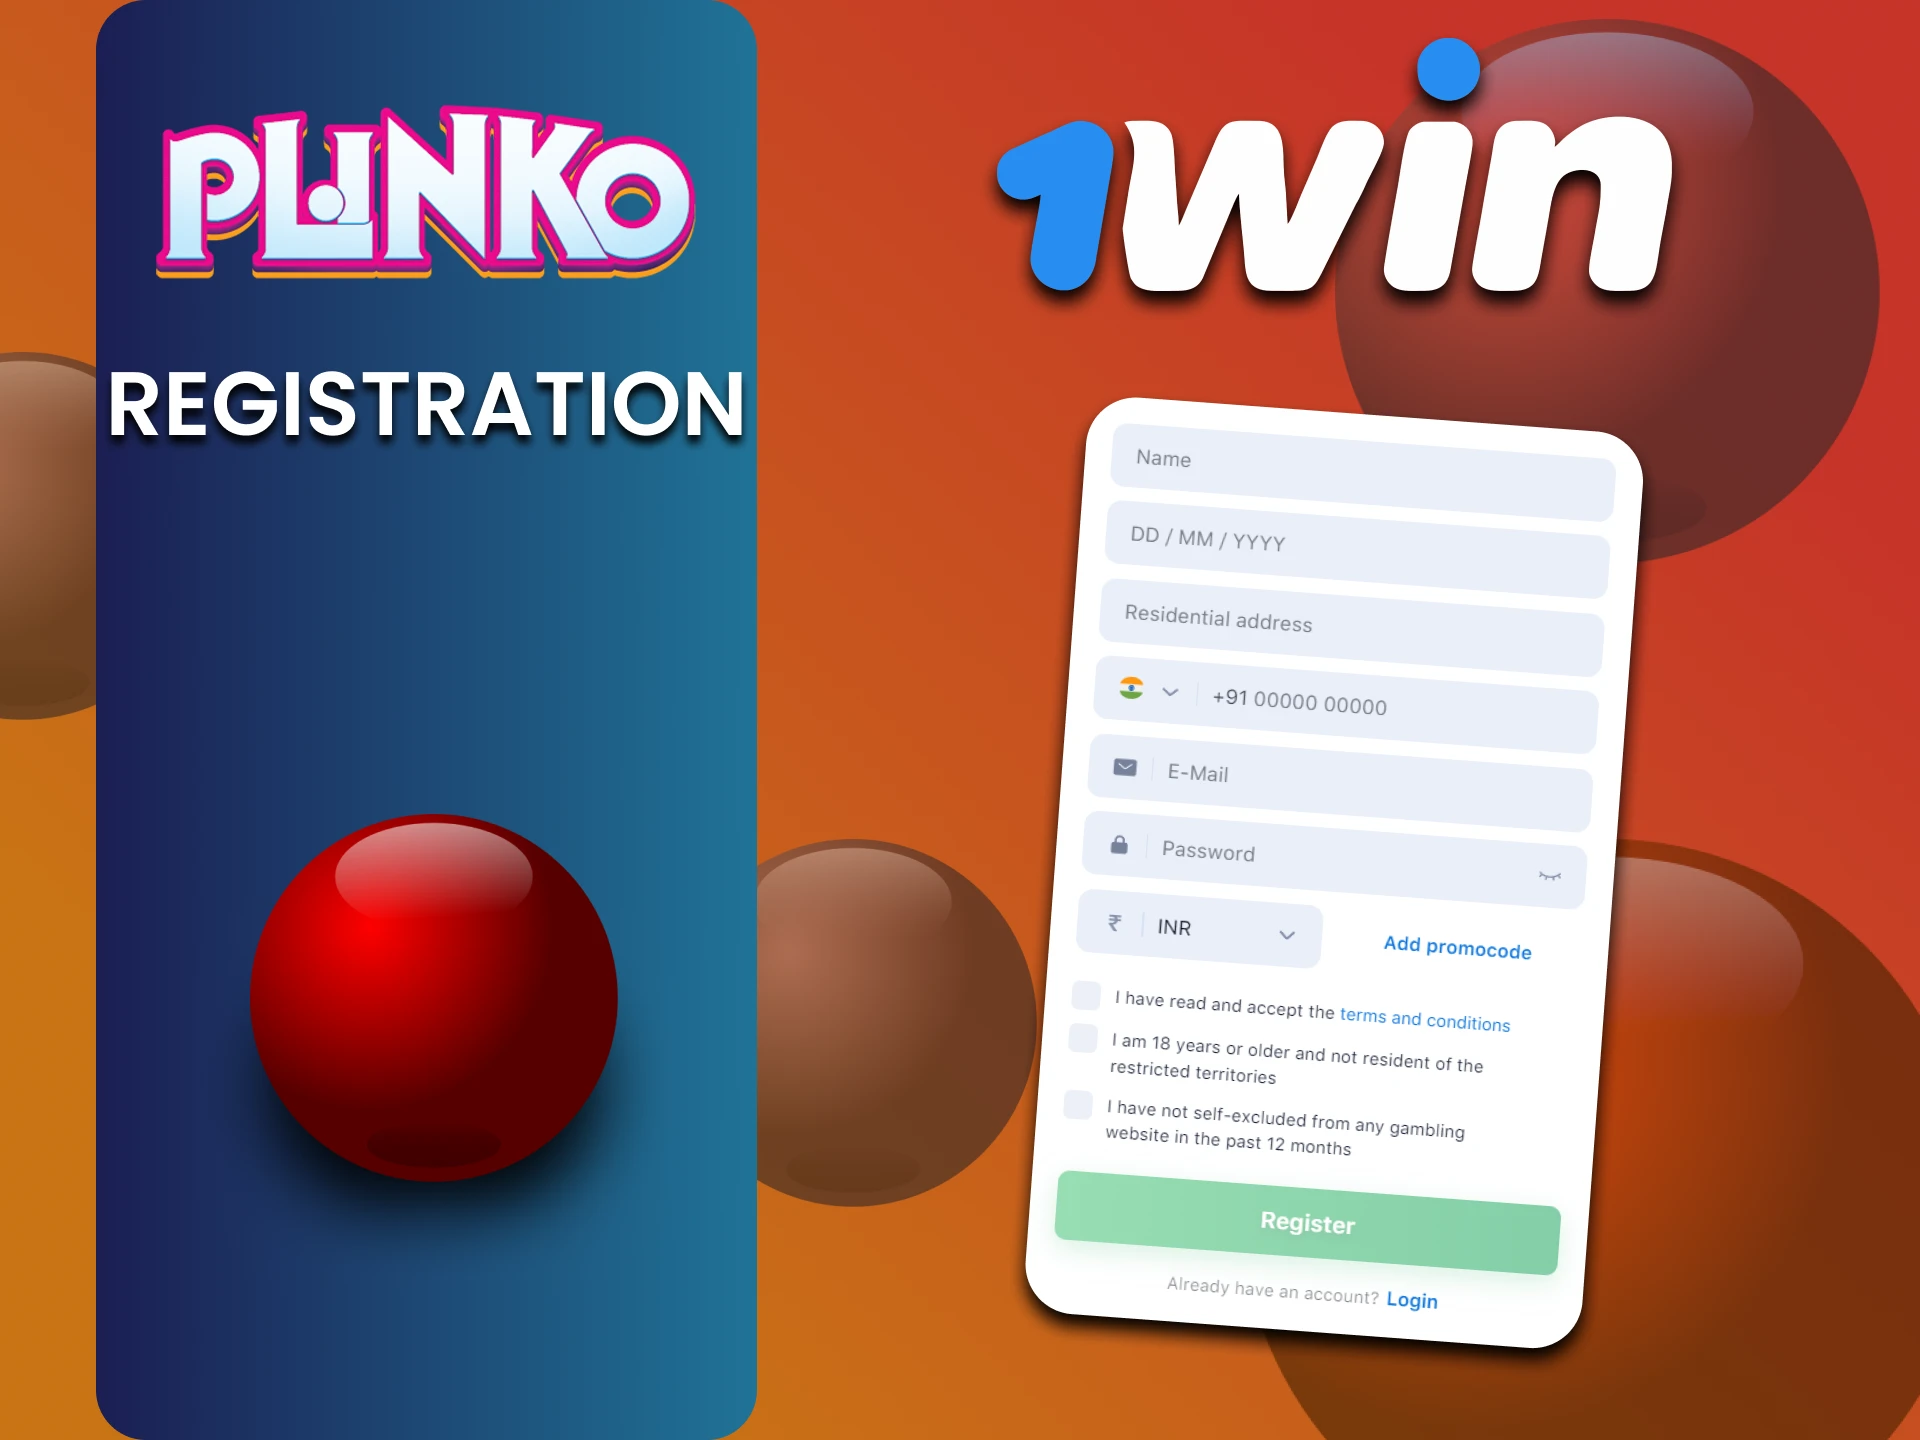 We will tell you how to go through the registration process on 1win to play Plinko.